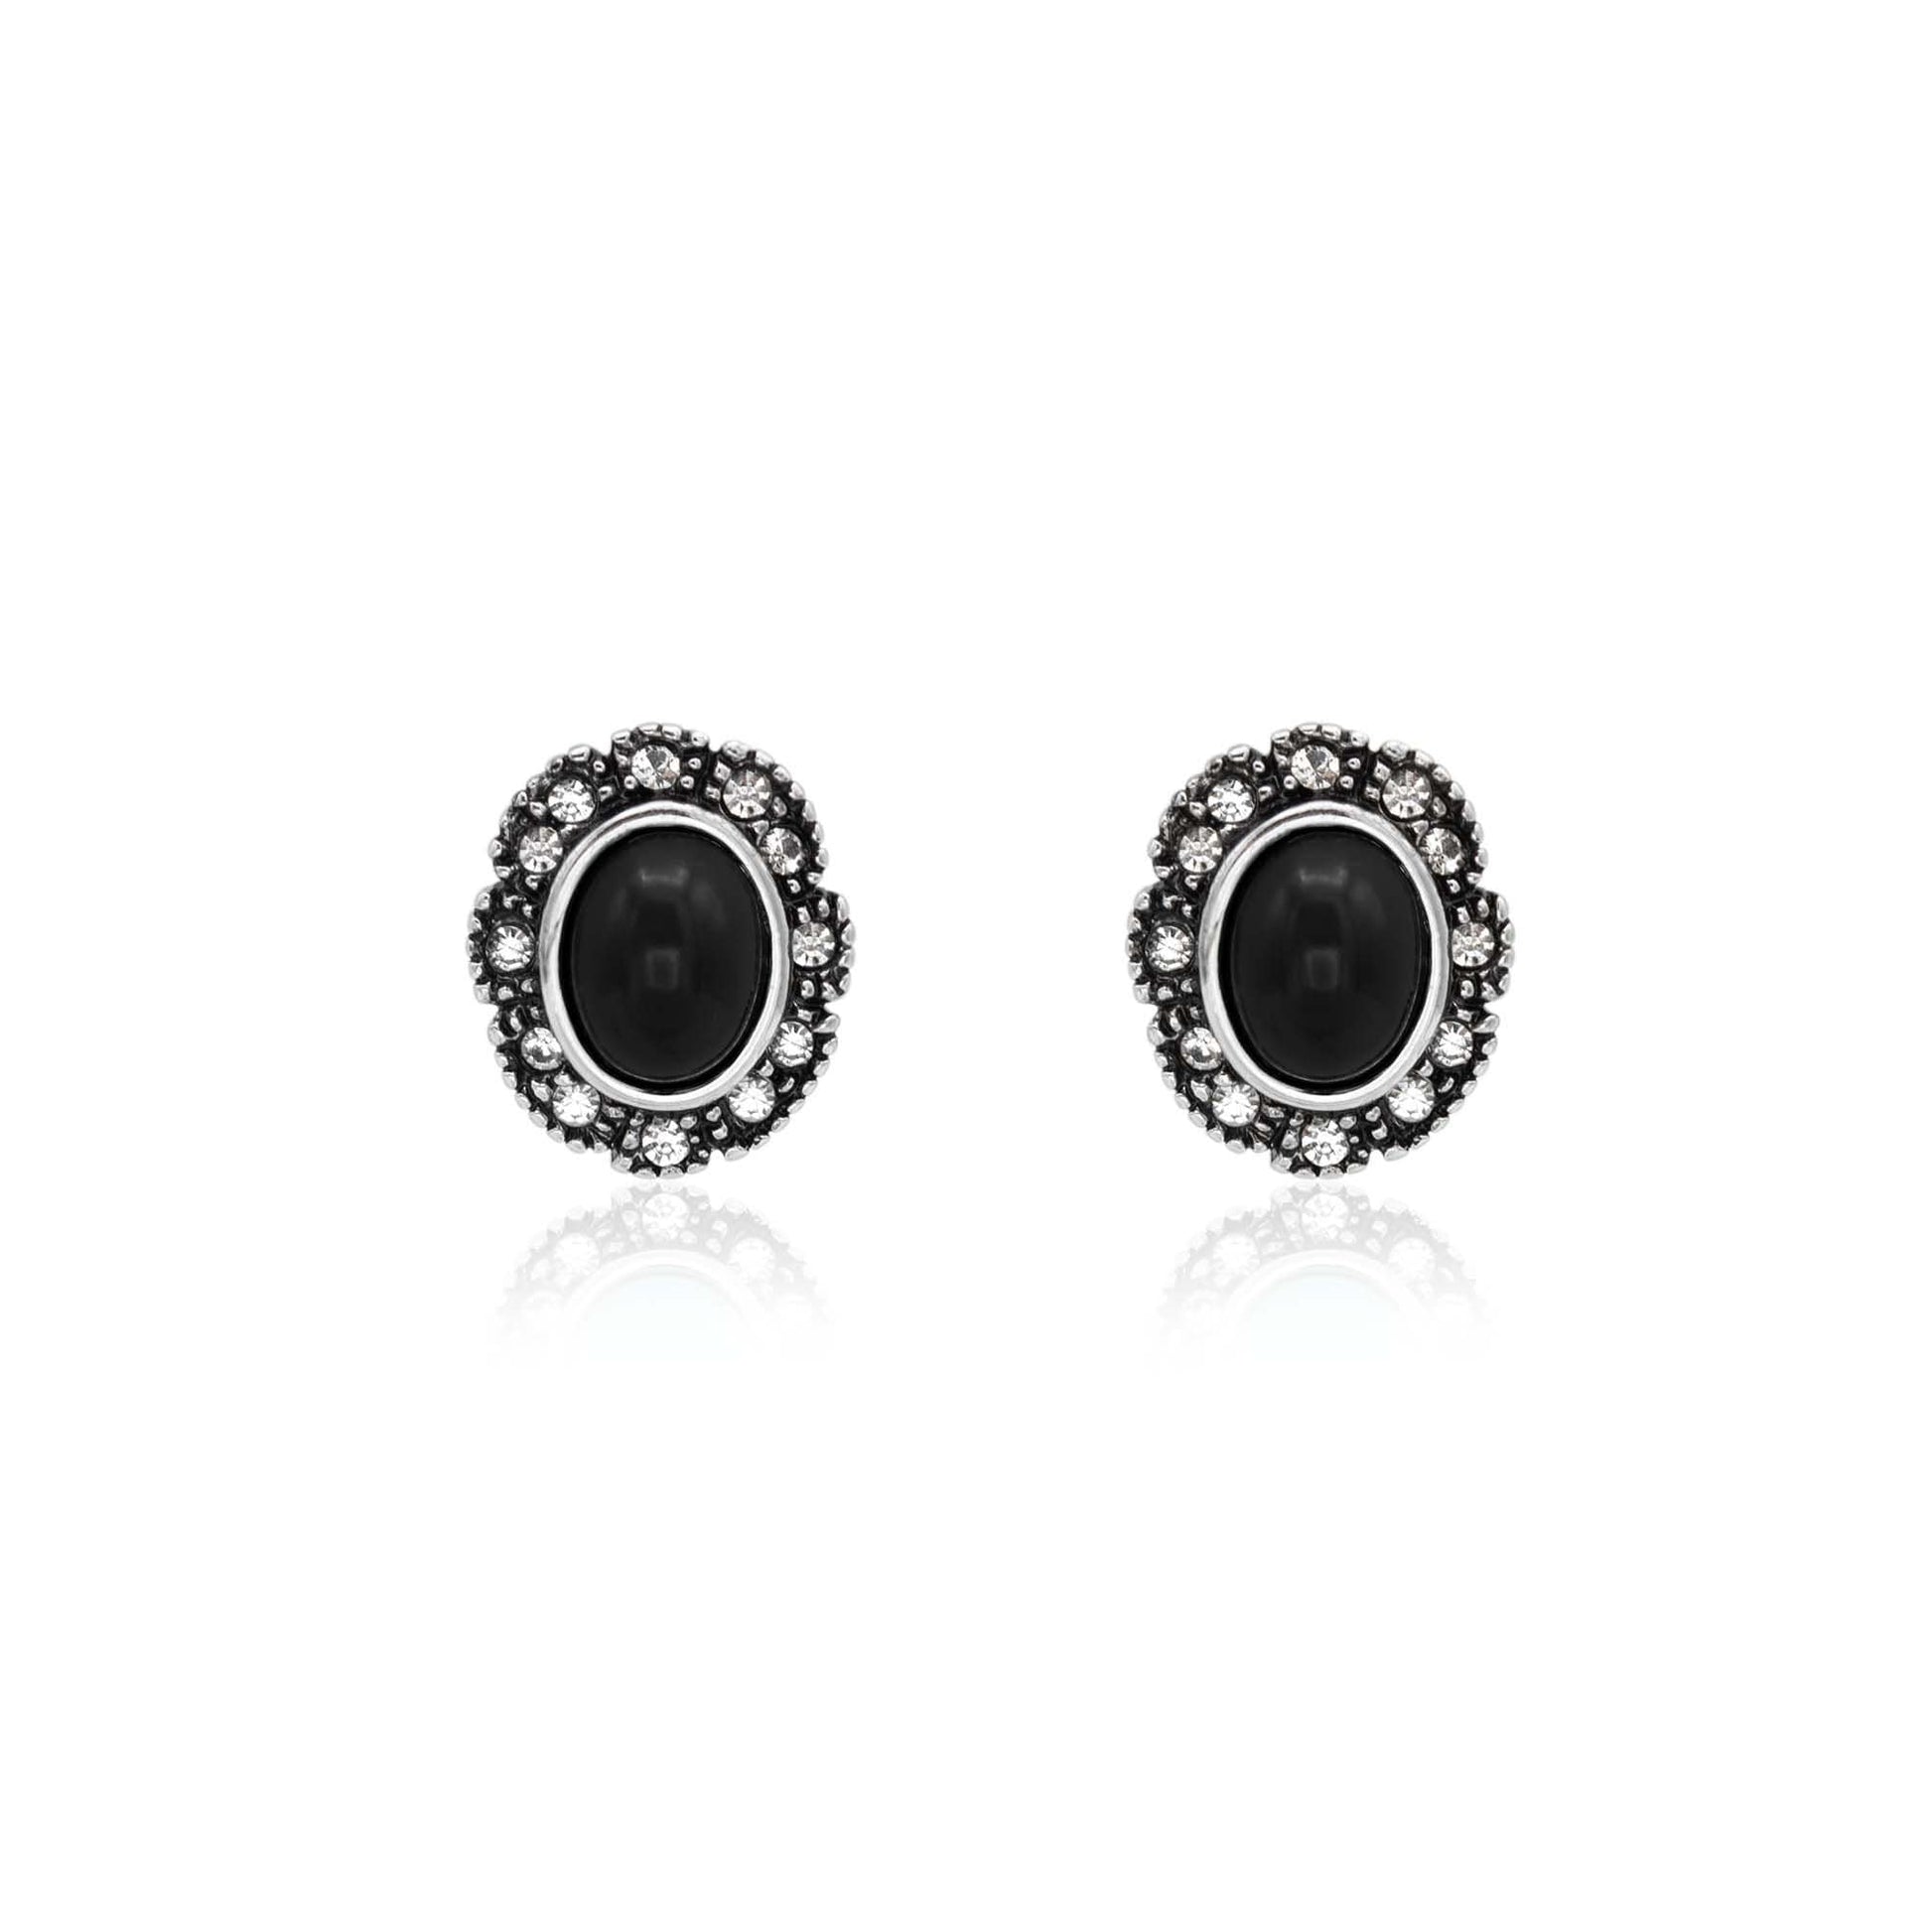 Vintage Black Onyx and Clear Austrian Crystal Post Earrings Antique White Gold Silver Plating Jewelry E2425-OW - Limited Stock - Never Worn